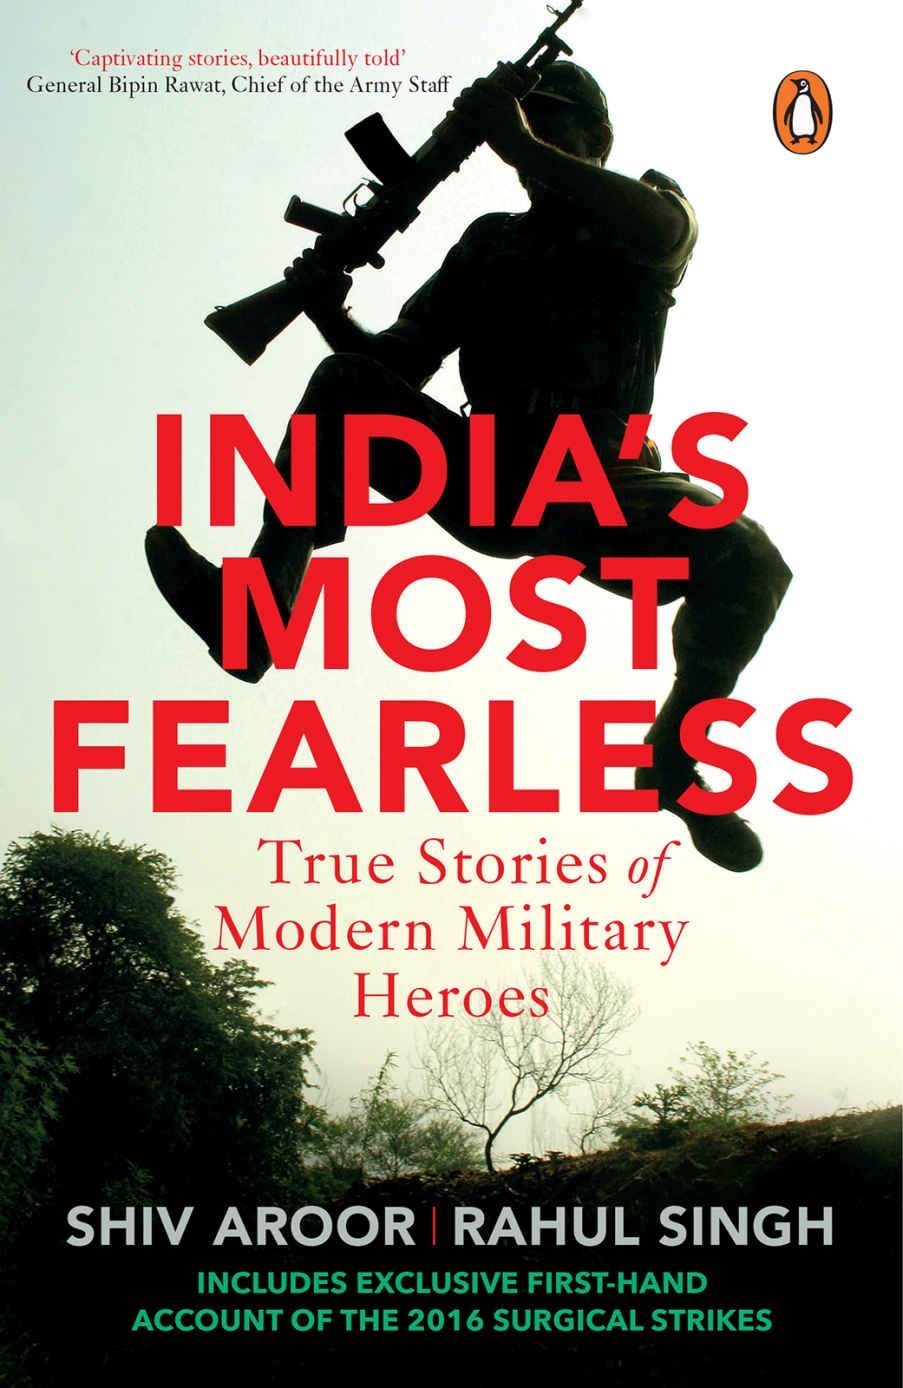 Indias Most Fearless Book by Shiv Aroor and Rahul Singh Eduhyme